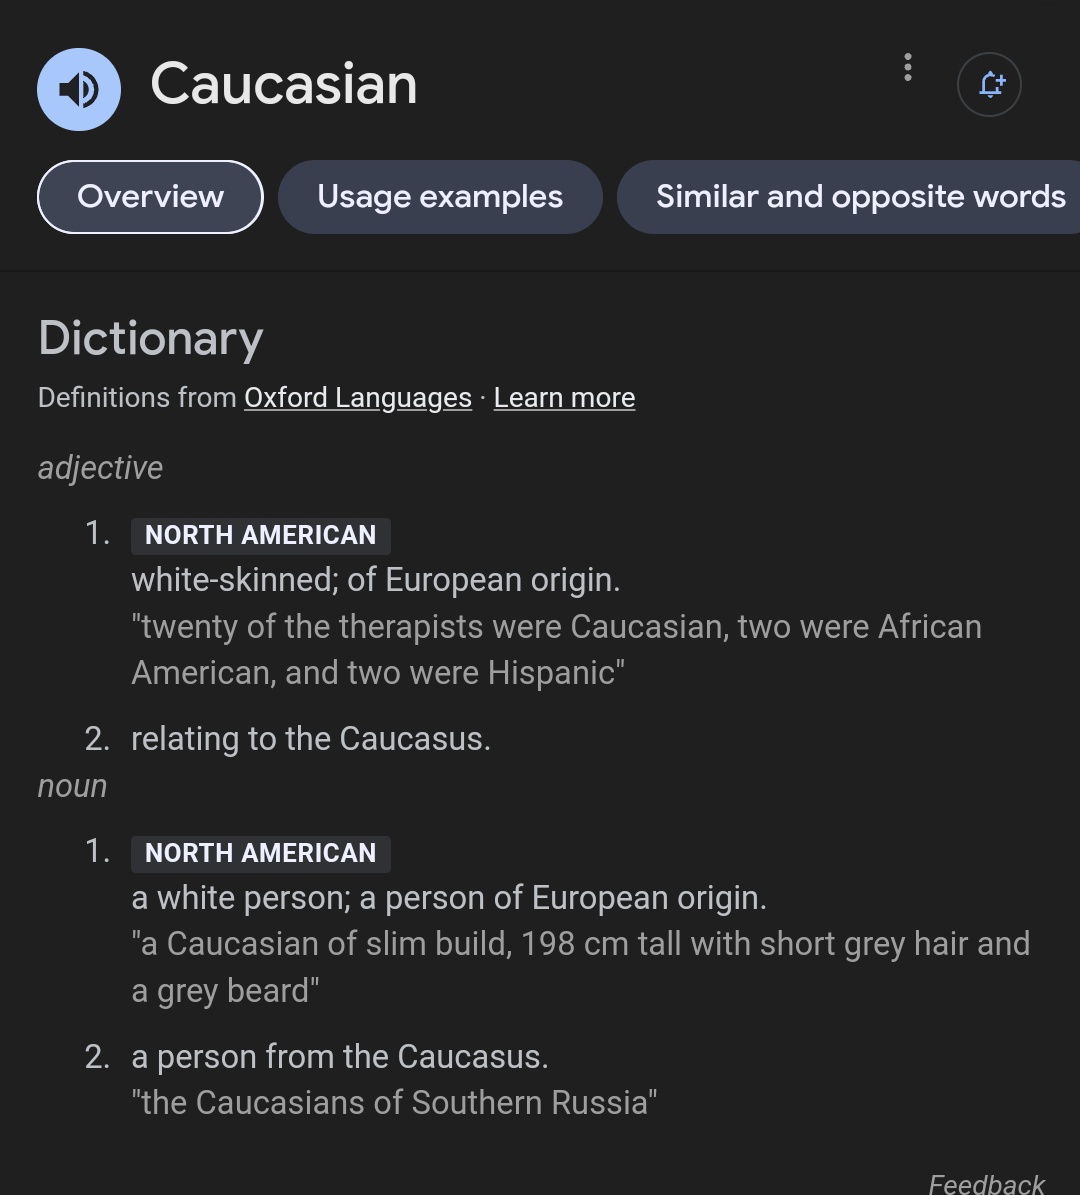 so fucking tired of americans appropriating of terms and misusing them and then laughing at people for using the correct meaning. Yes I'm caucasian. No I'm not white

the US is literally the only country where caucasian means white, everywhere else it means 'from the caucasus'